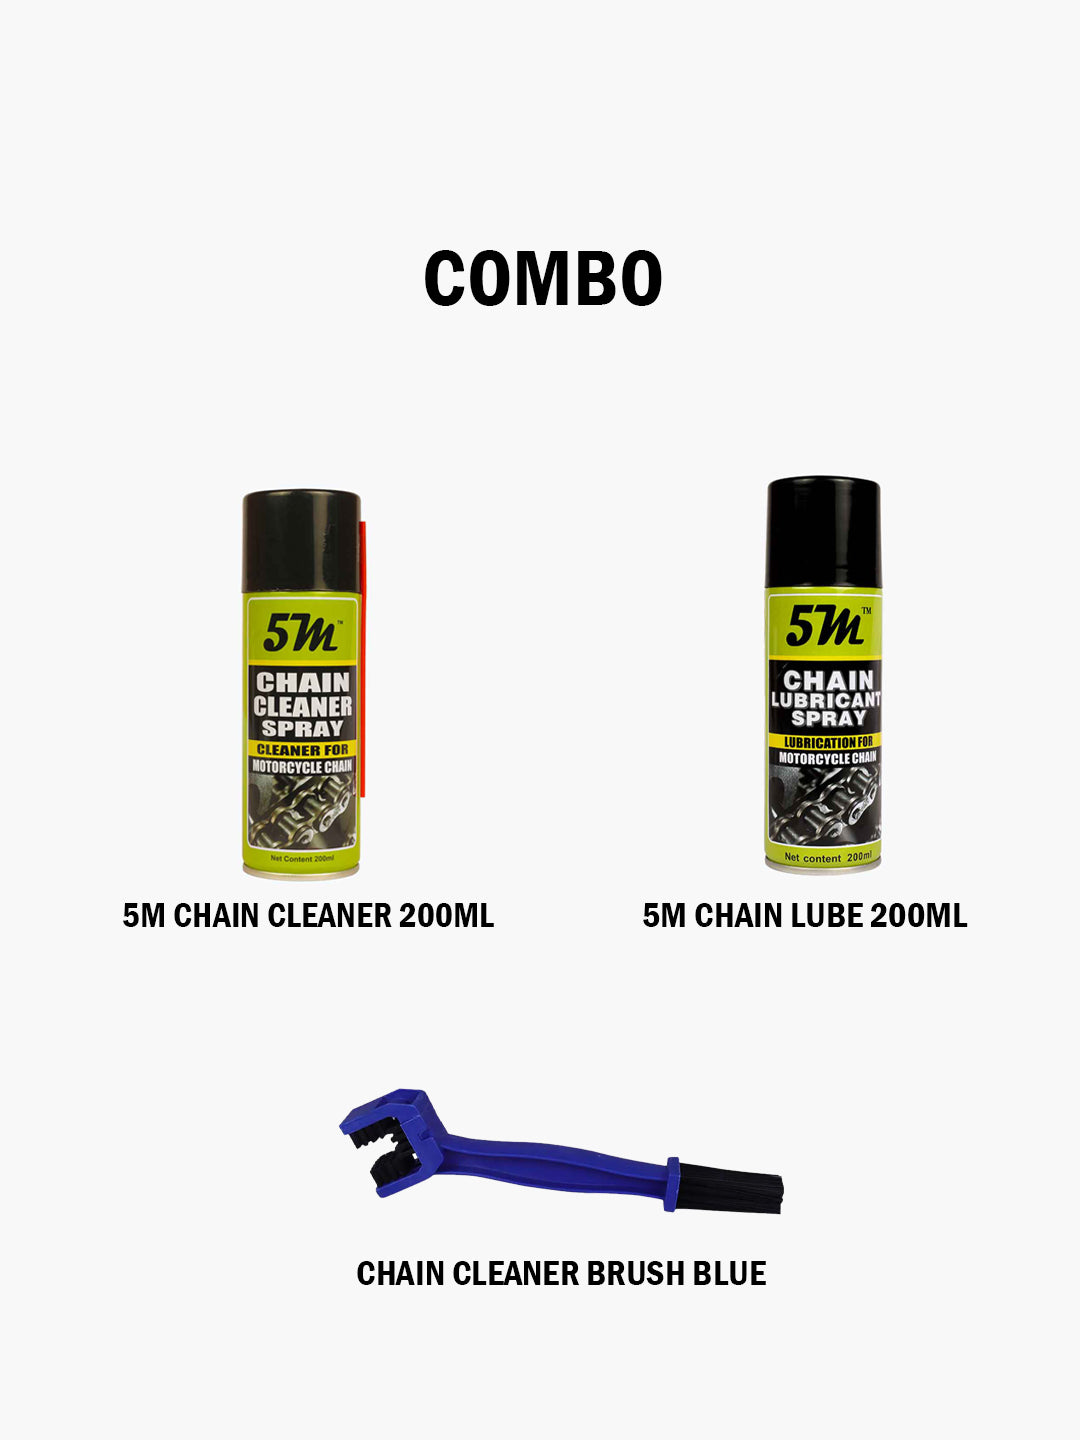 CHAIN CLEANER BRUSH BLUE + 5M CHAIN LUBE +  5M CHAIN CLEANER COMBO